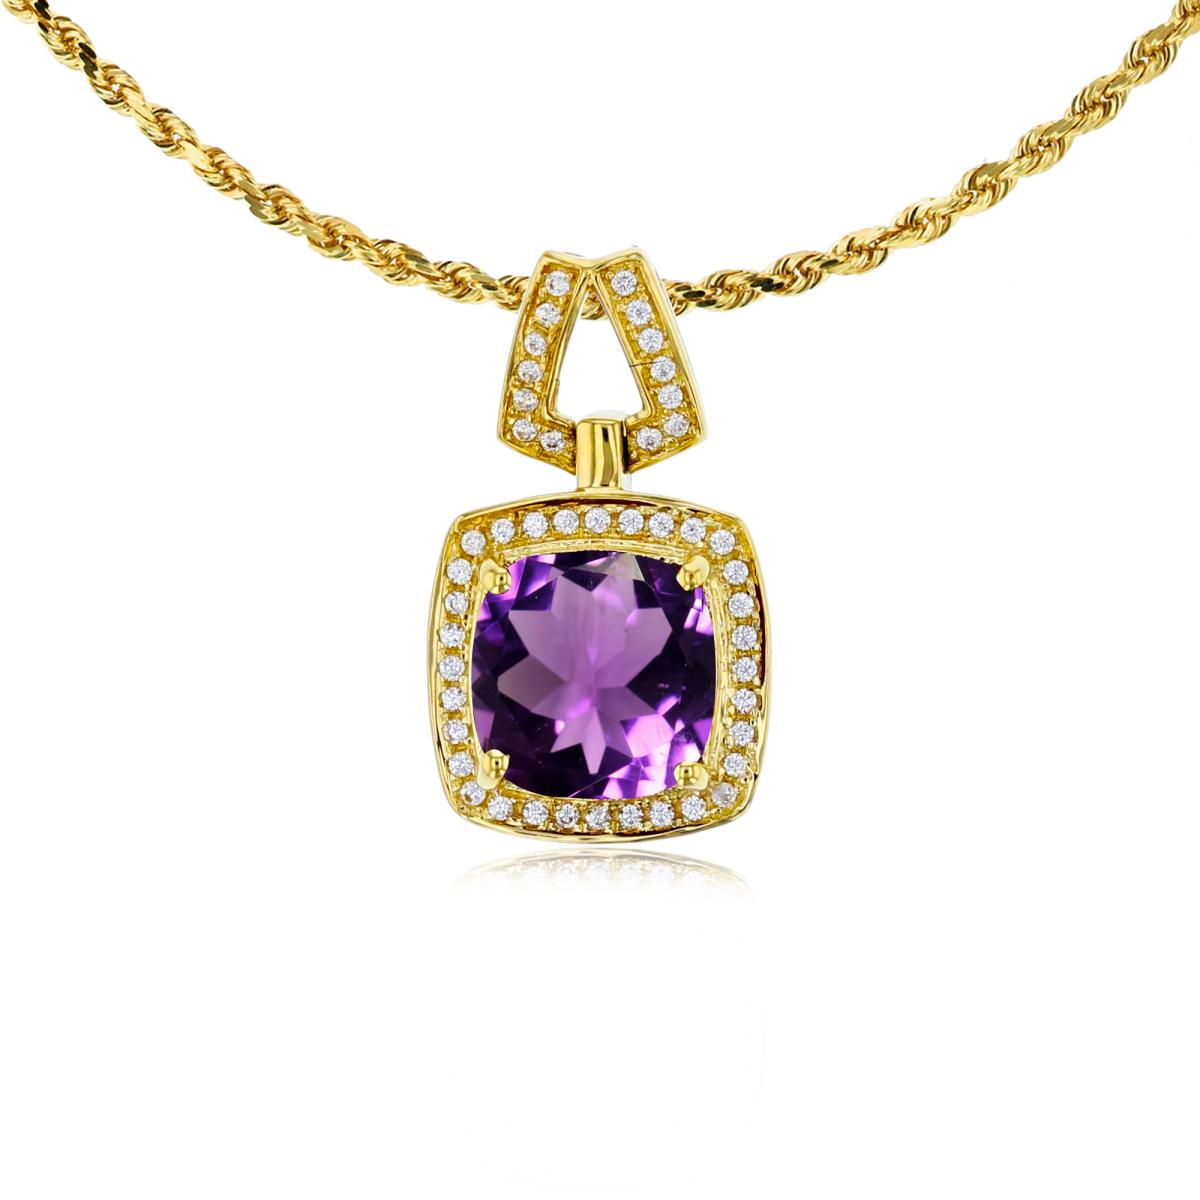 14K Yellow Gold 7mm Cushion Amethyst & 0.10 CTTW Diamond Halo 18" Rope Chain Necklace